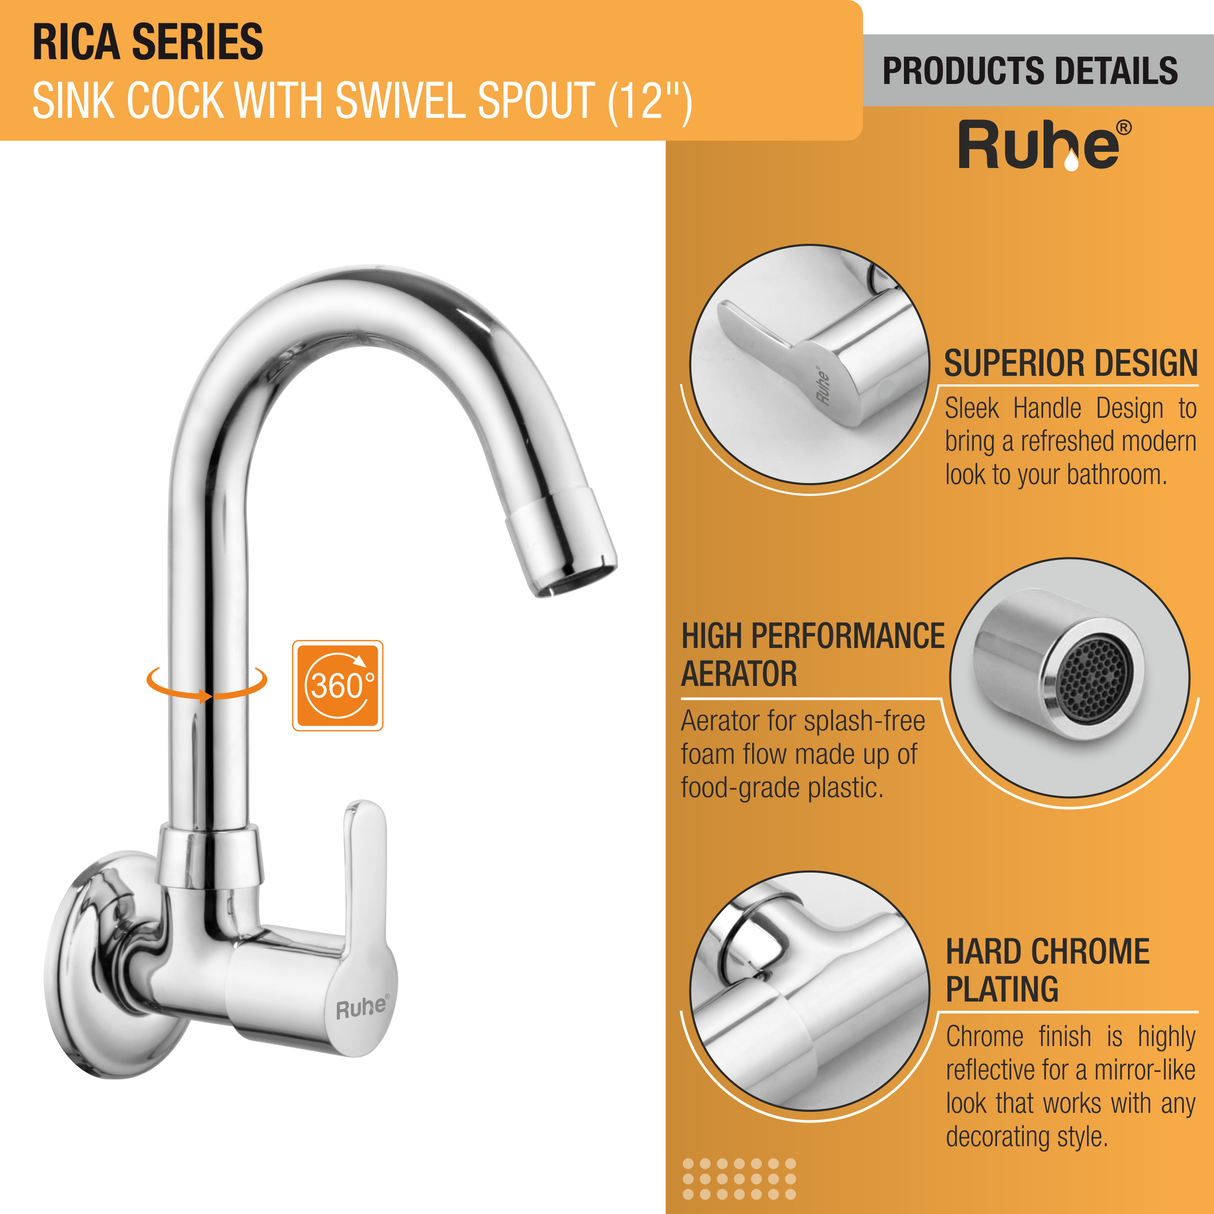 Rica Sink Tap with Small (12 inches) Round Swivel Spout Brass Faucet product details